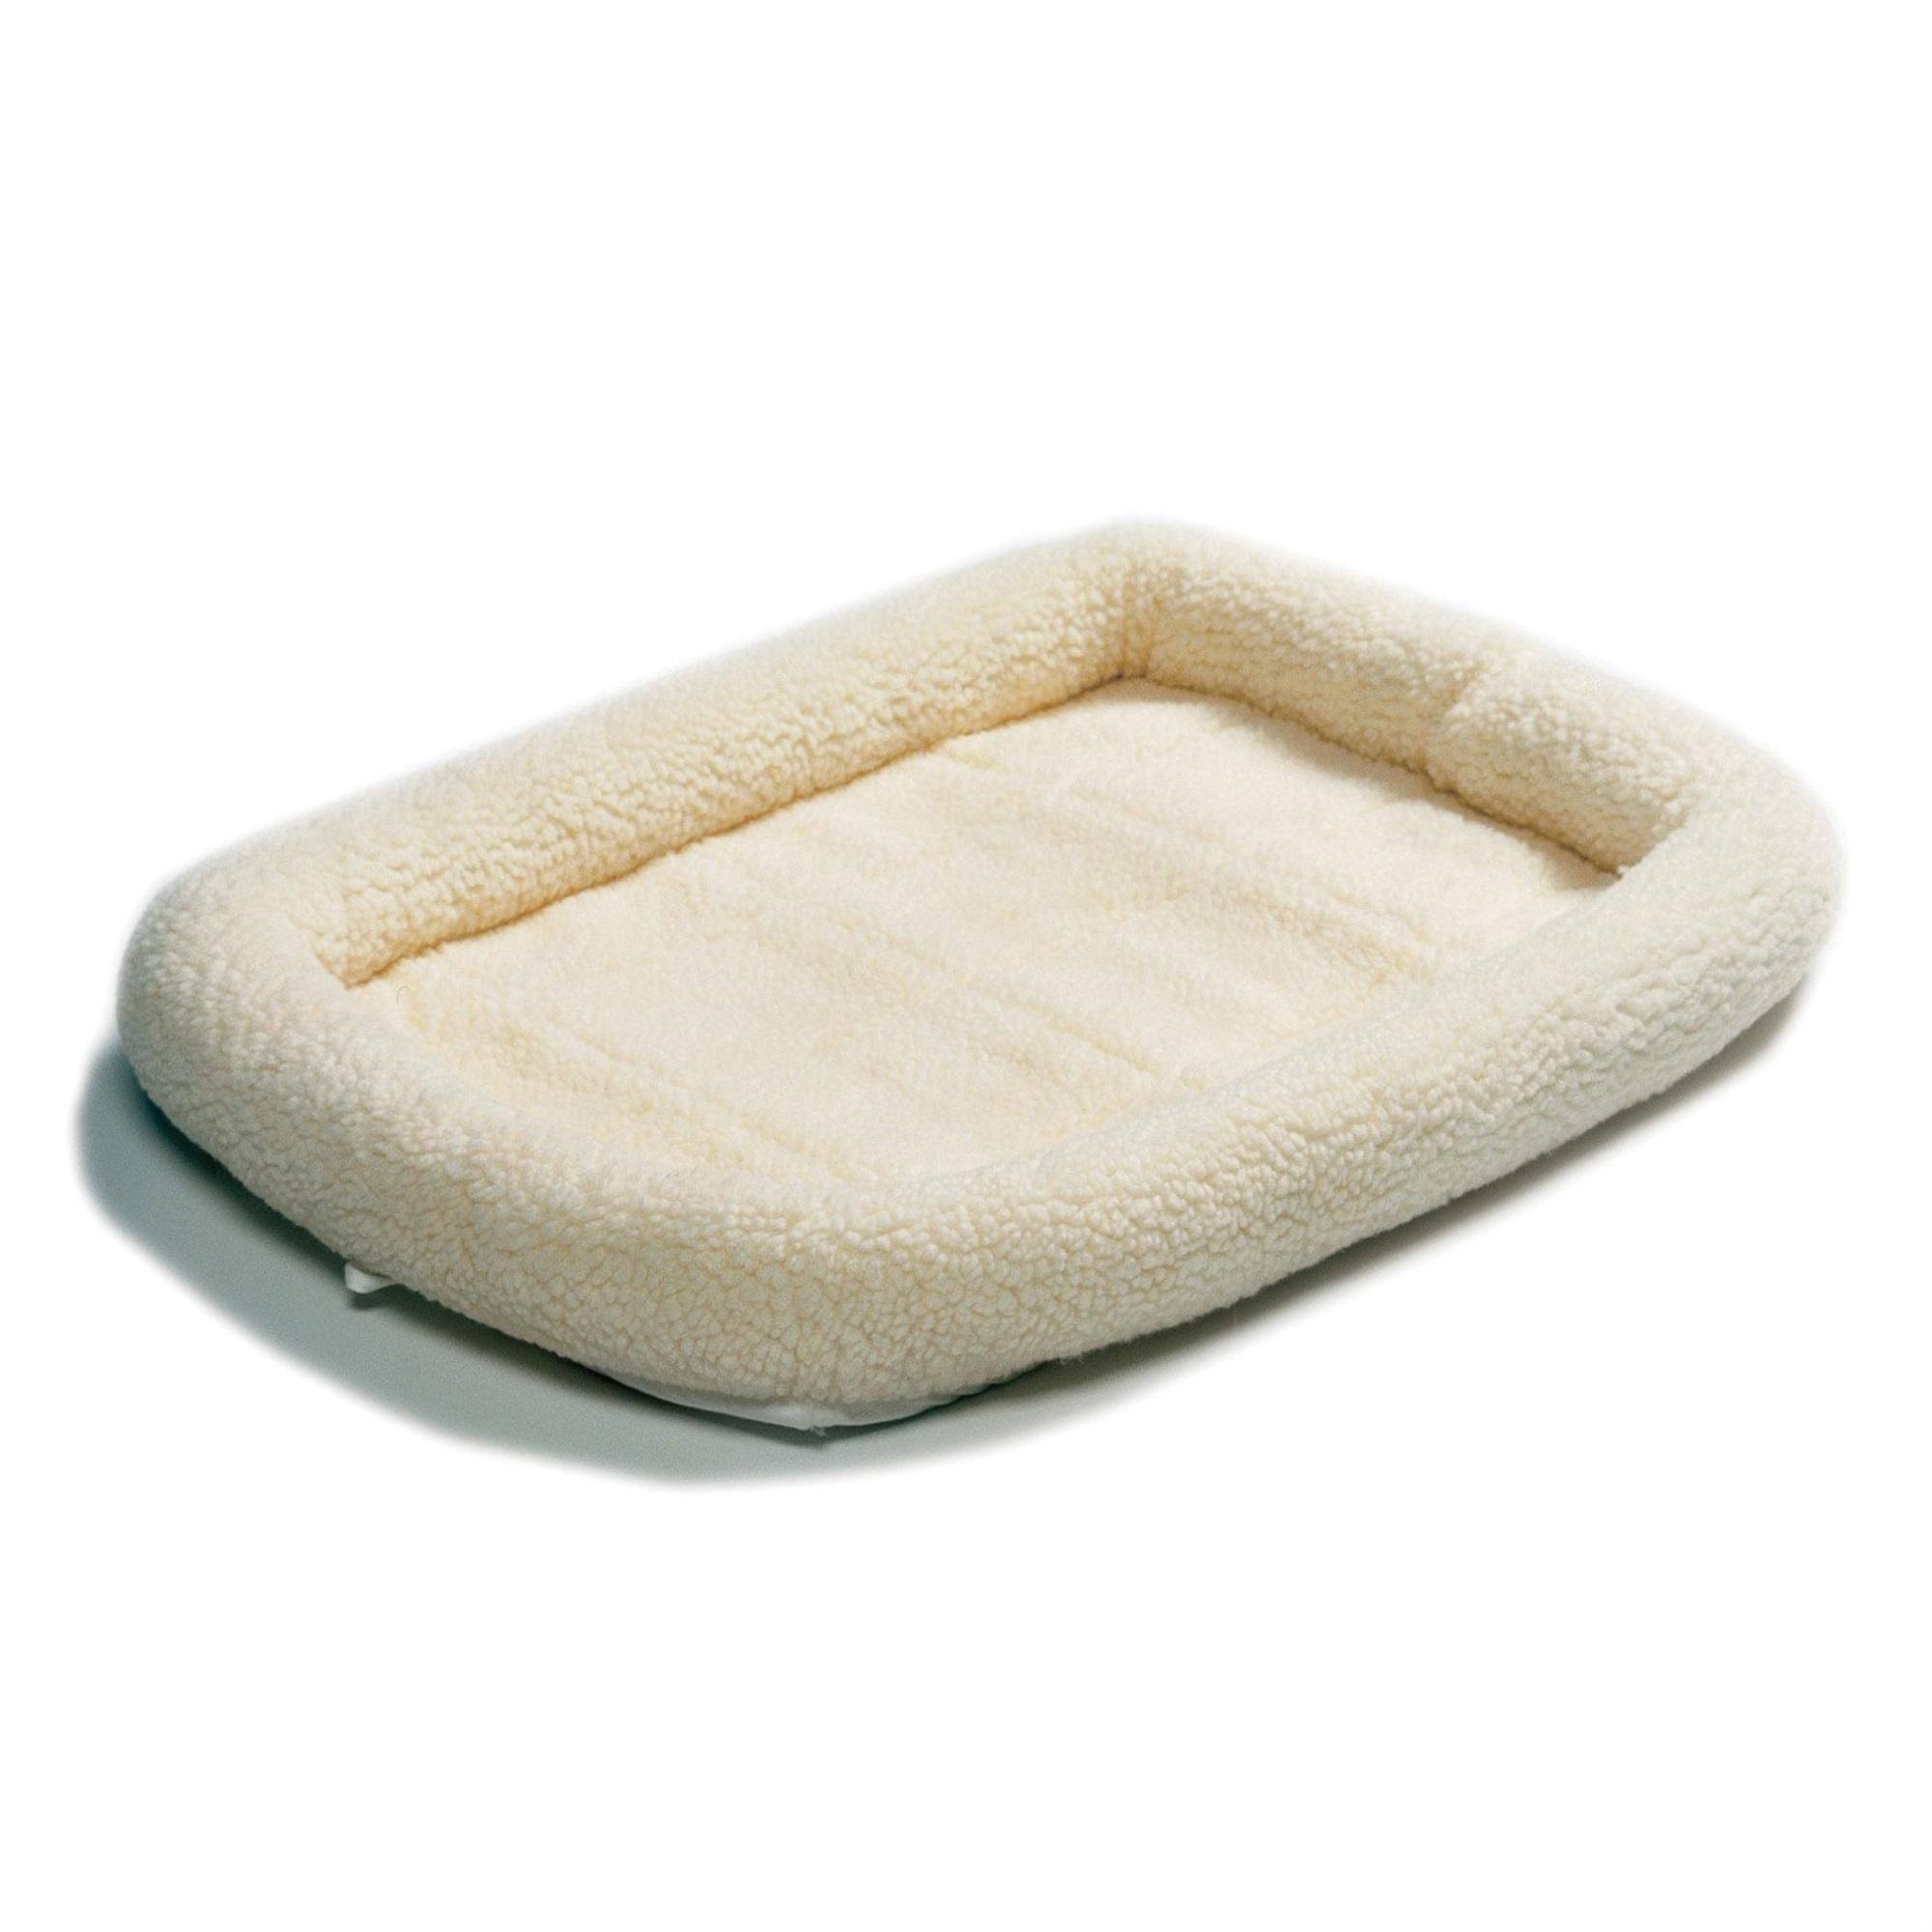 Midwest Quiet Time Bolster Pet Dog Bed - White, 42" x 26"